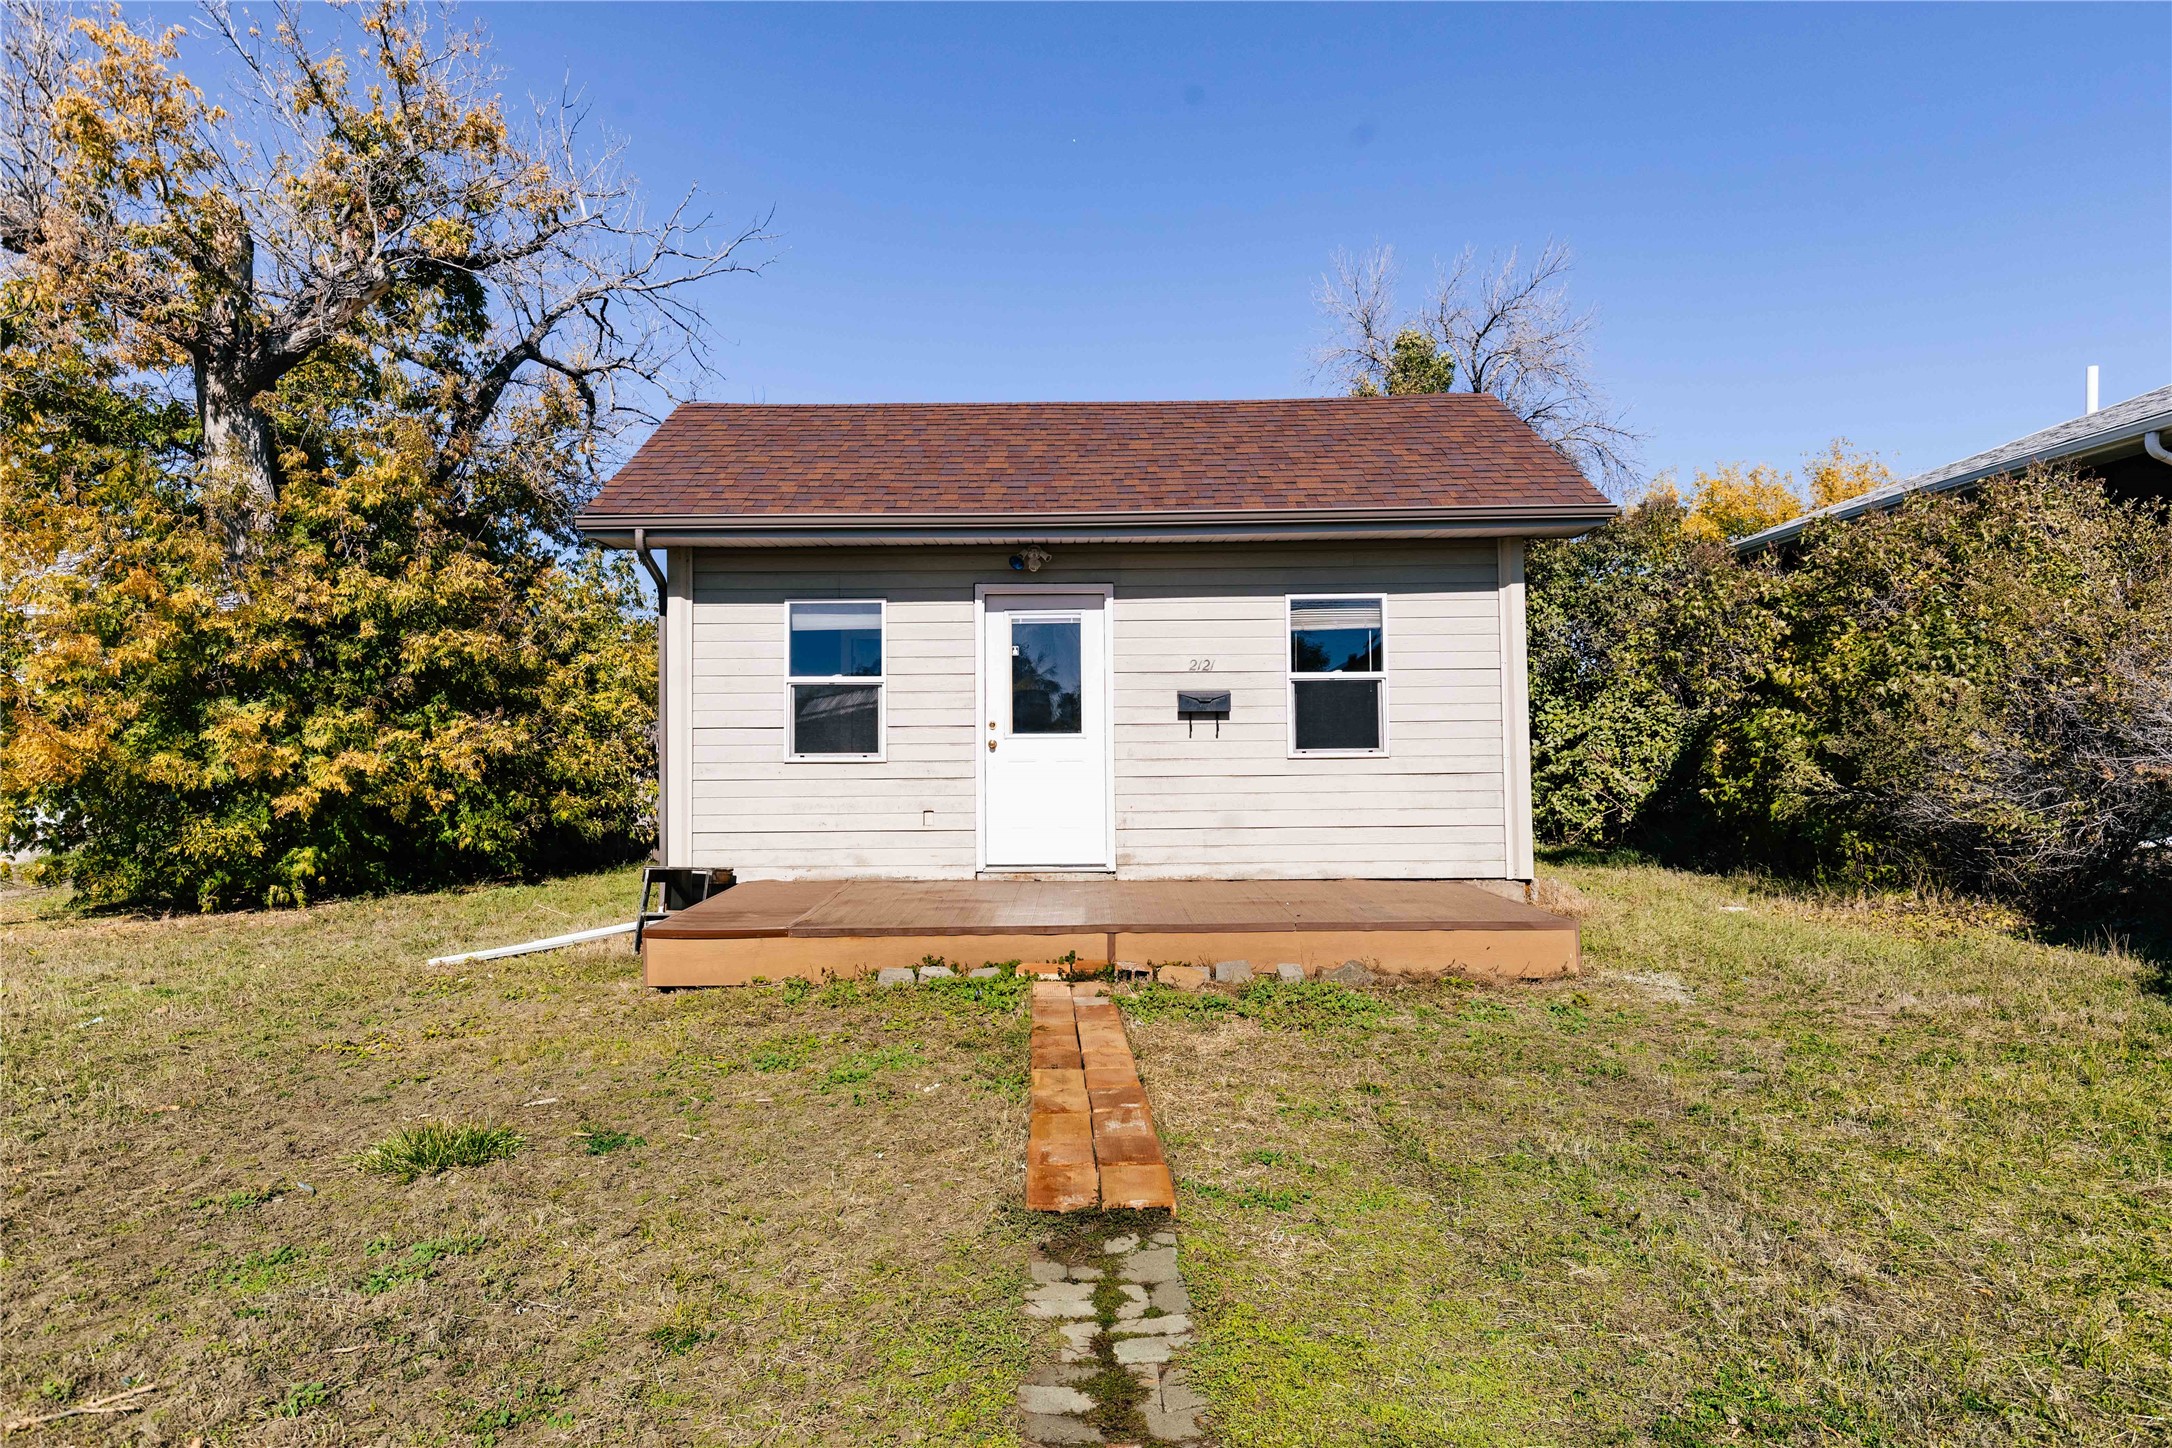 CUTE & COZY BUNGALOW with a FRESH BEAUTIFUL KITCHEN! This 1 bed 2 bath home is affordably priced and features a 2 car garage, fully fenced yard, front deck, and 2nd bathroom in the basement. This is a fantastic starter home and it’s just ready for its new owner! Ln